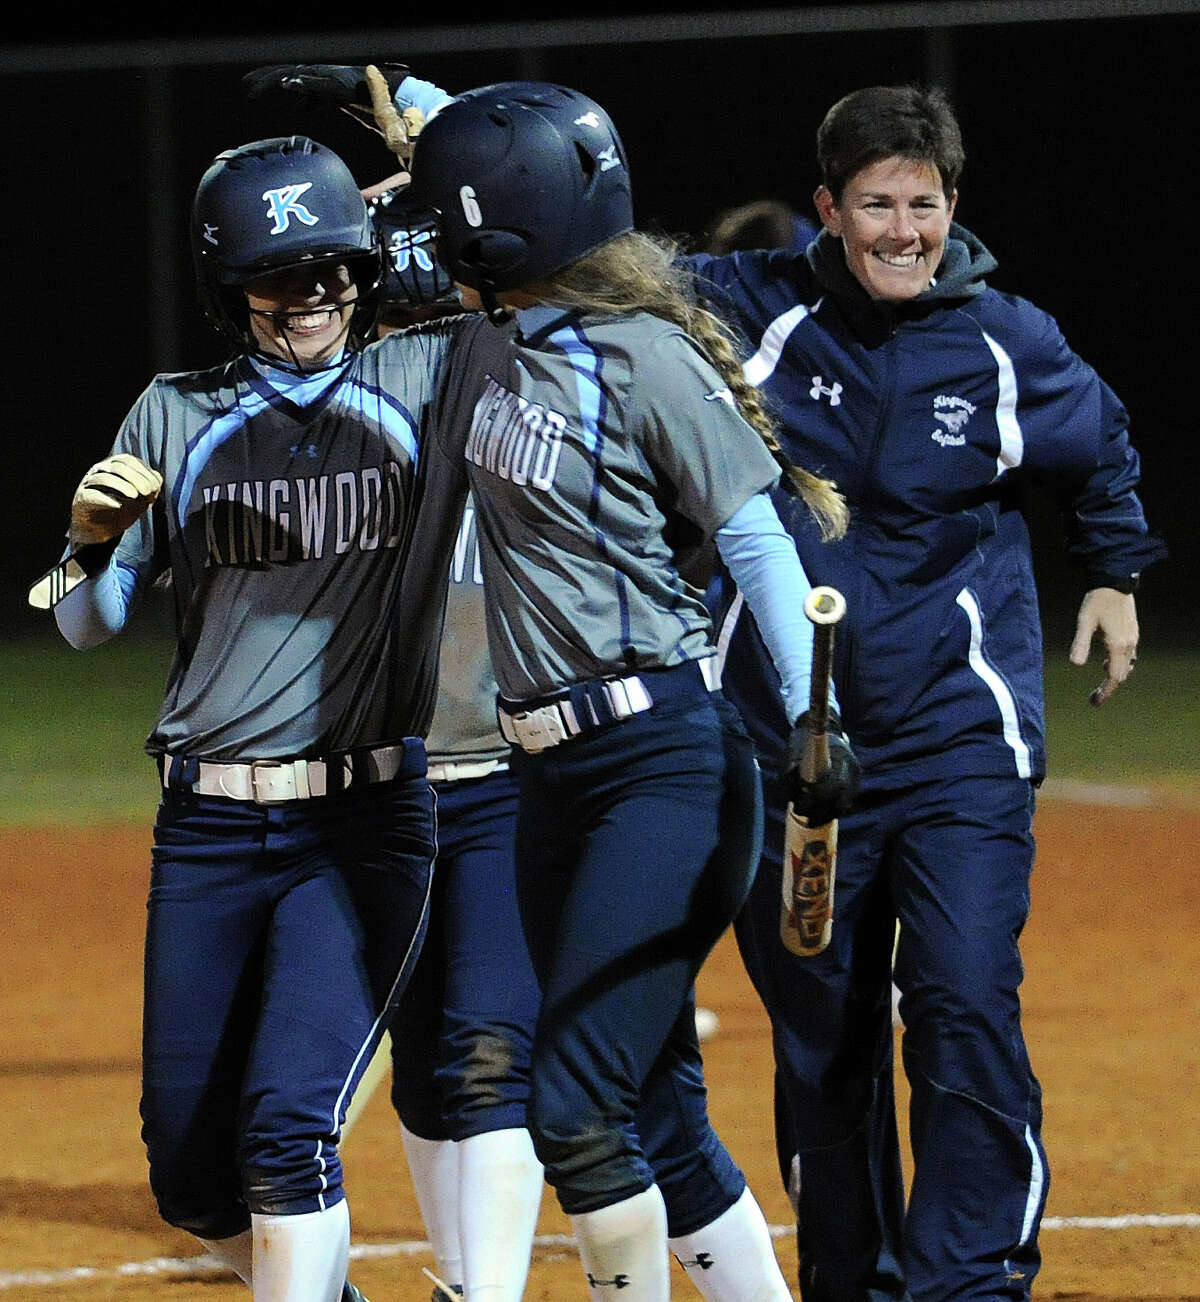 Gregory sisters give Kingwood a boost over Klein Collins